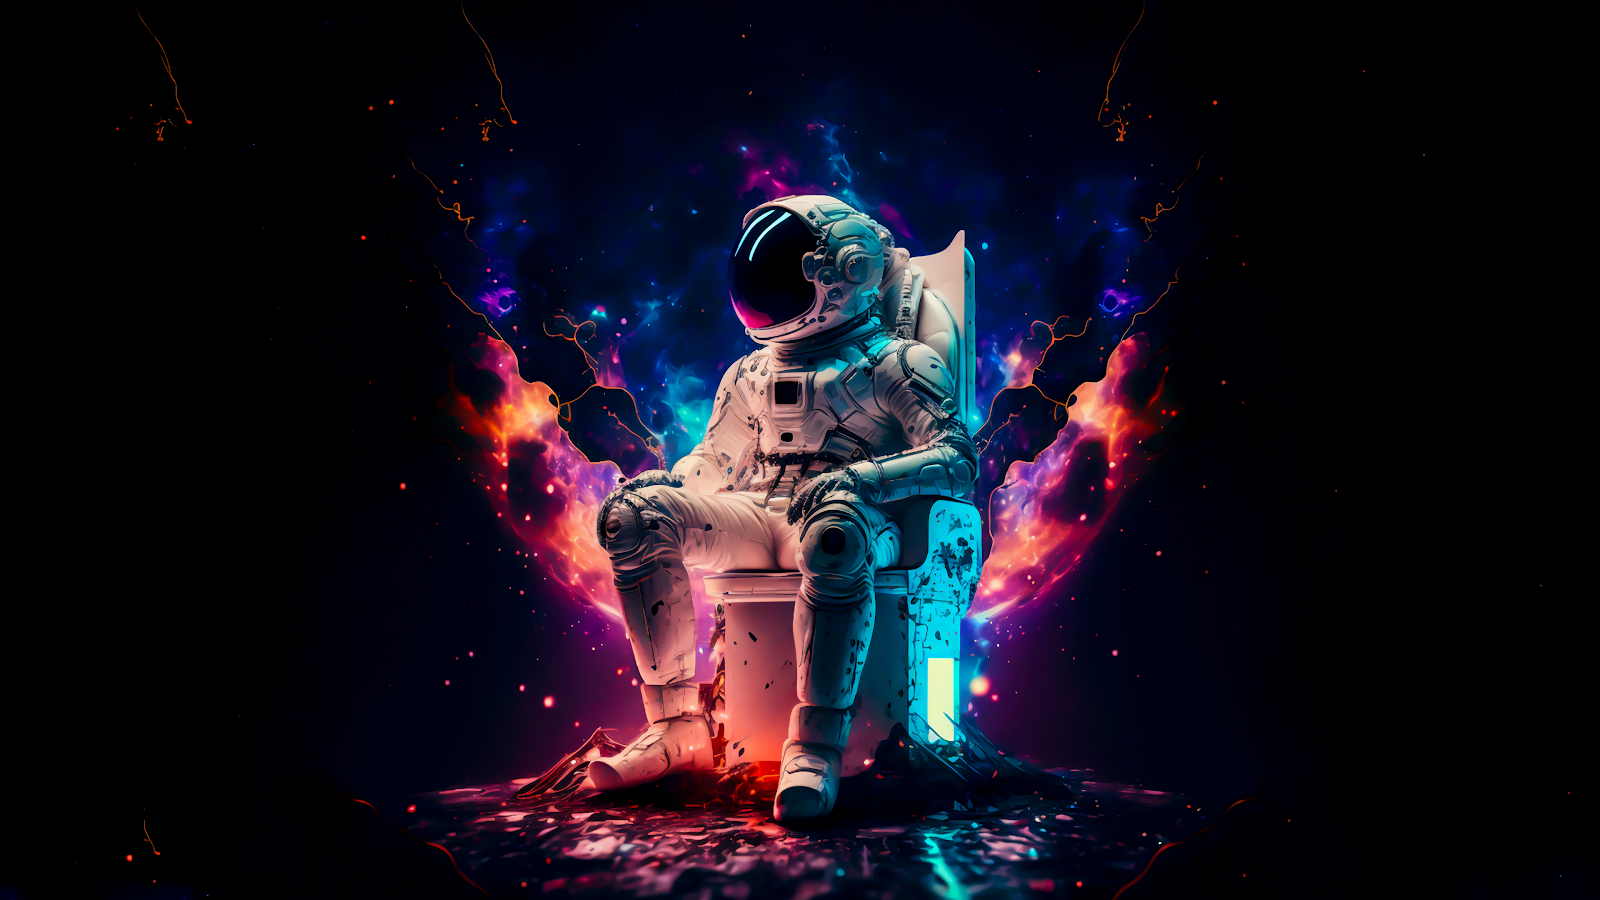 The Astronaut 4k Wallpapers - Wallpaper Cave